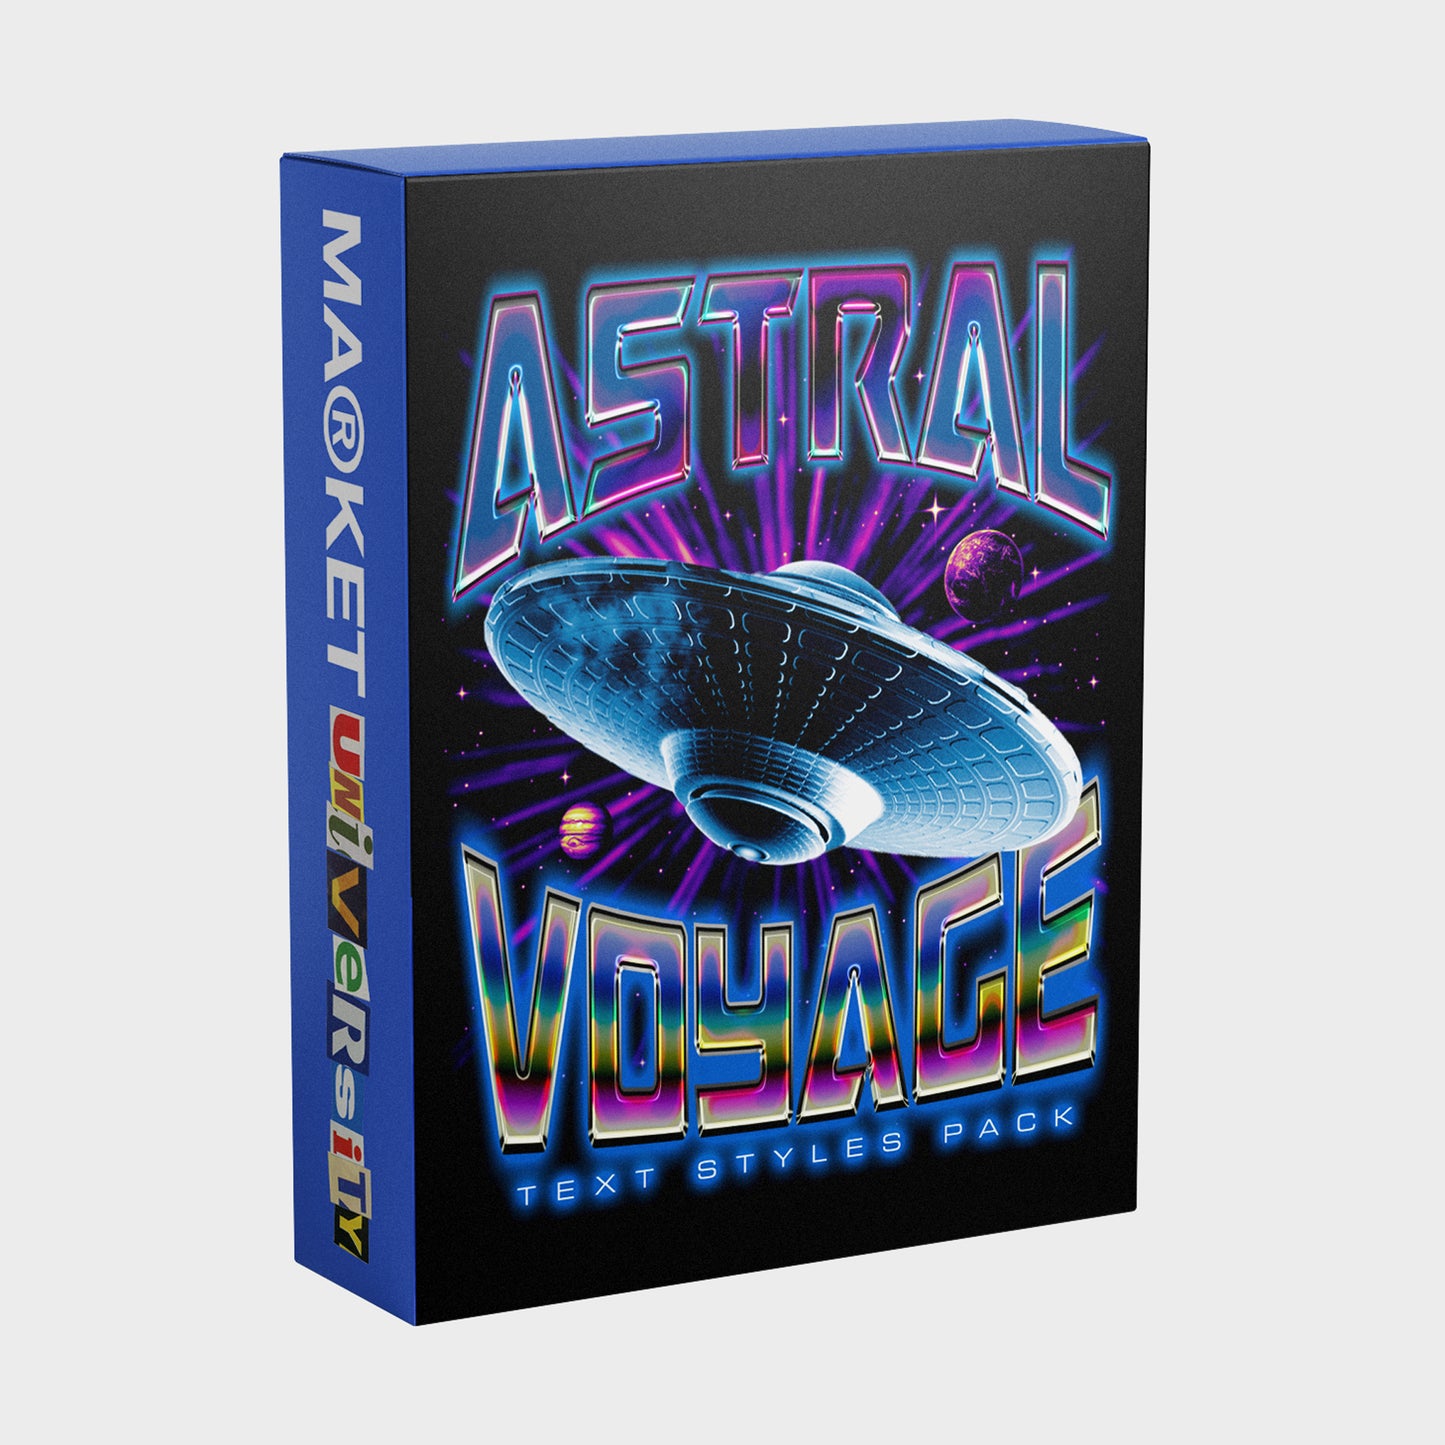 ASTRAL VOYAGE TEXT STYLES PACK